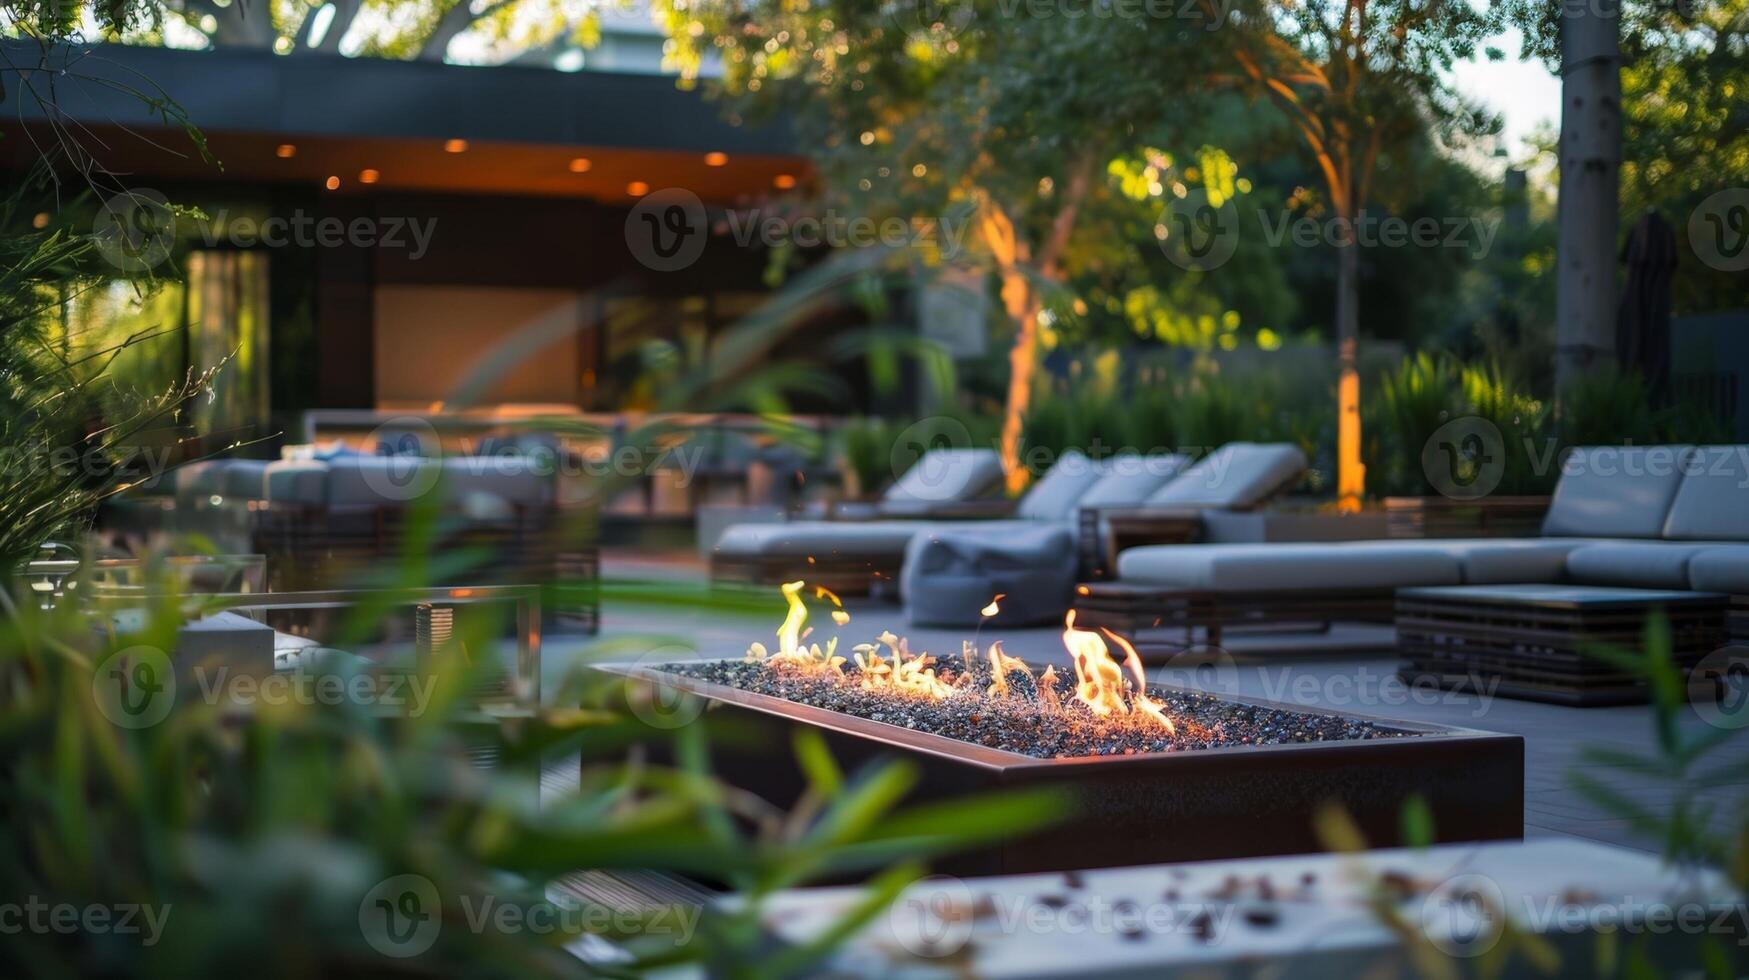 The modern and airy design of the fire pit area contrasts beautifully with the lush greenery surrounding it creating a serene oasis for relaxation. 2d flat cartoon photo